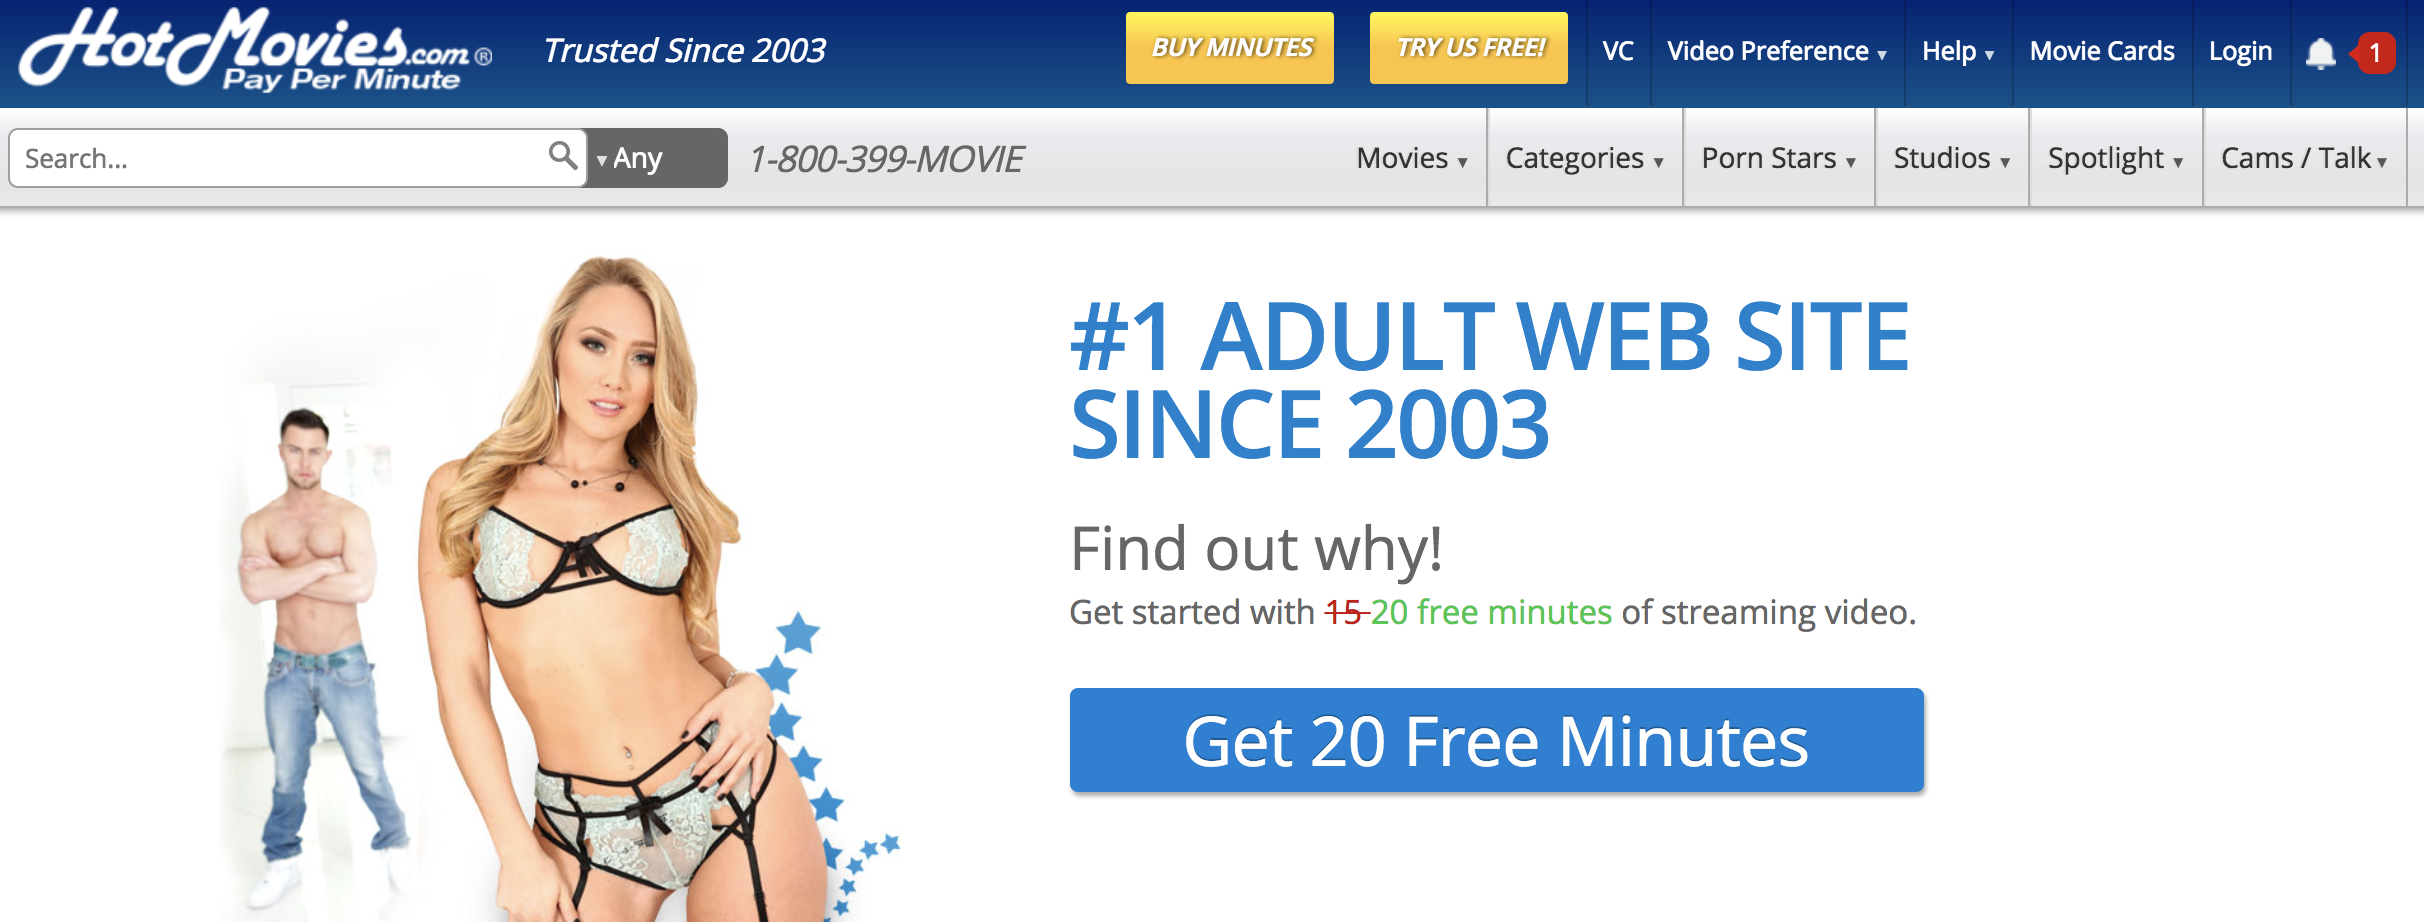 best of Adult video per minute Pay